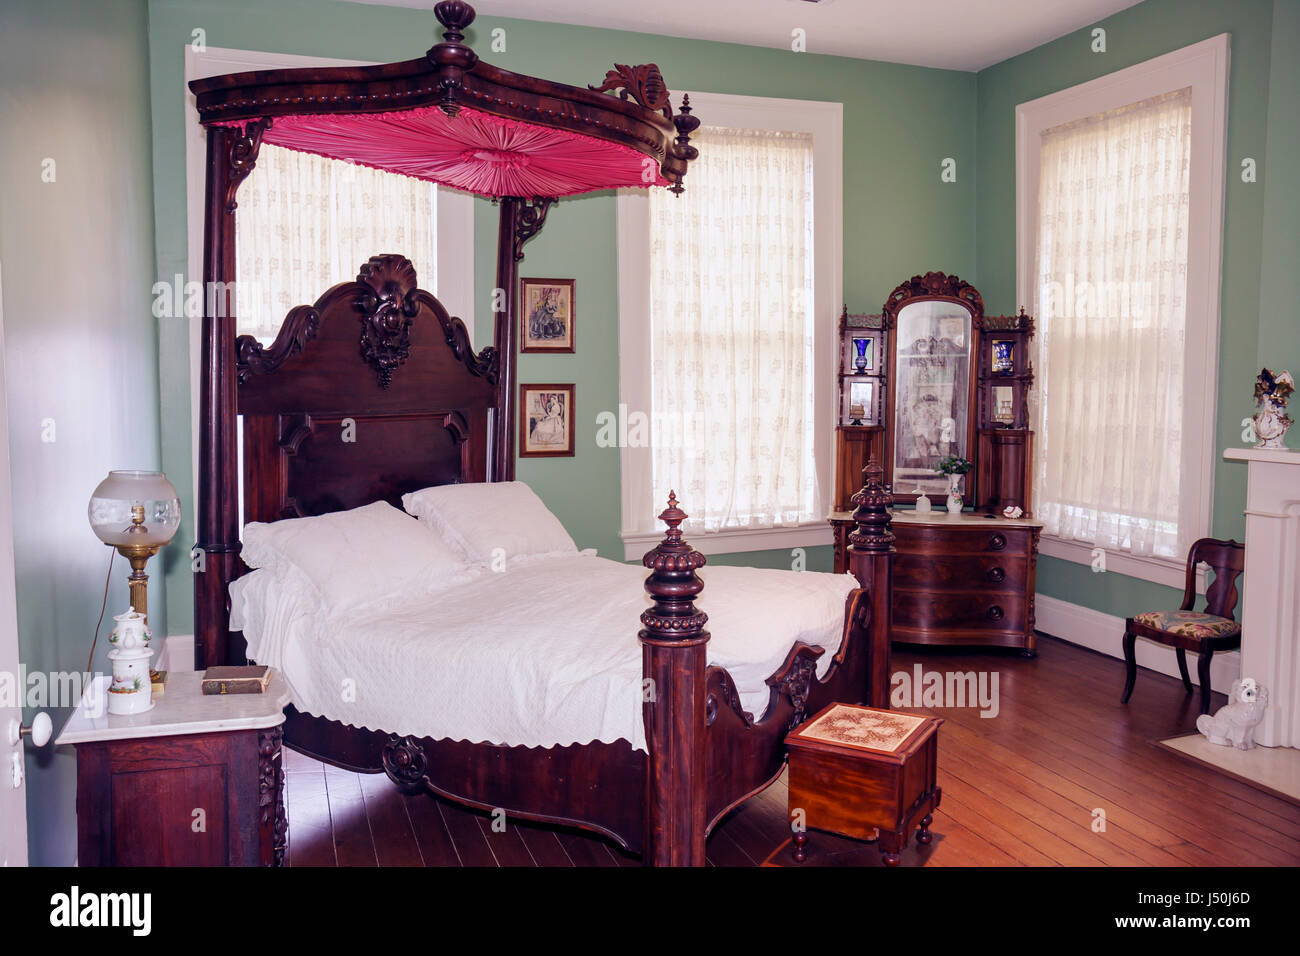 Alabama,Montgomery County,Montgomery,Old Alabama Town,historic buildings,city skyline,Ordeman house,houses,1850s,bedroom,four poster bed,canopy,dresse Stock Photo